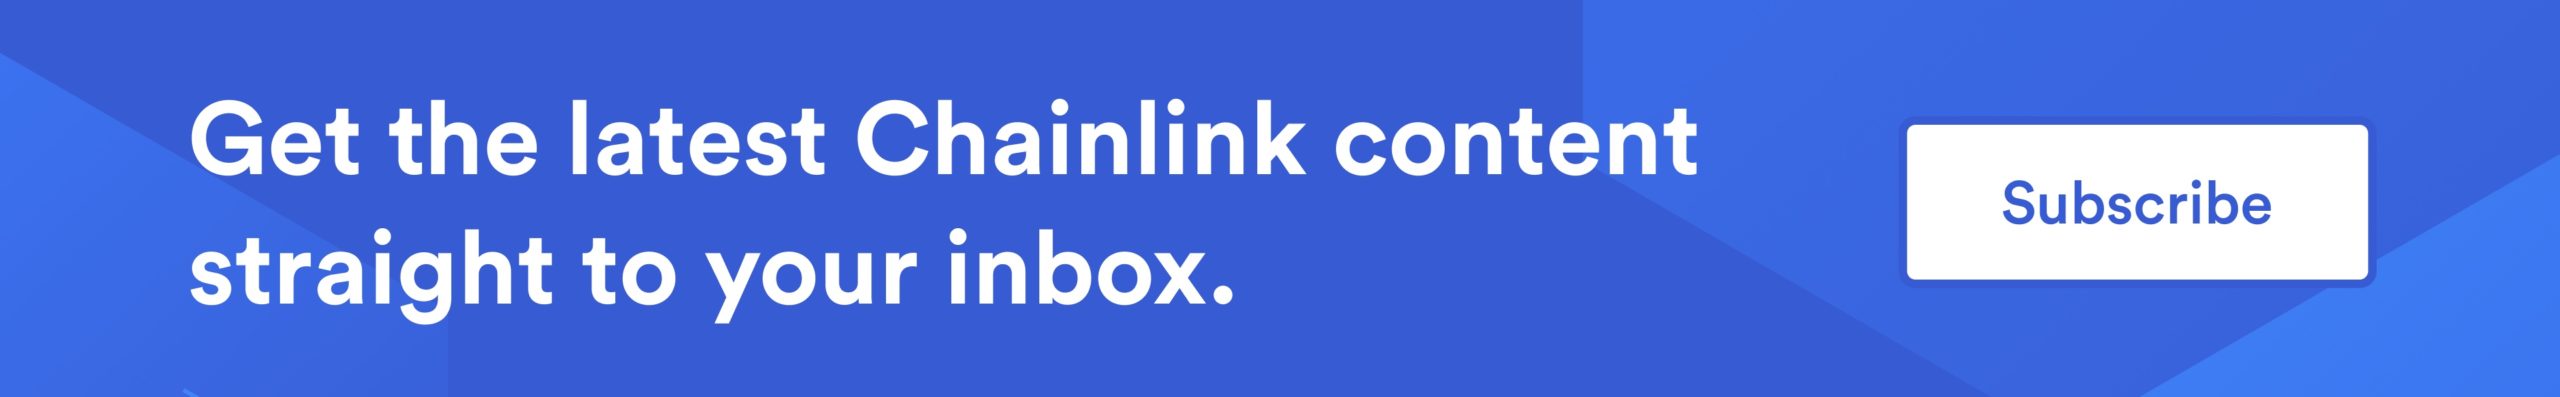 Chainlink Newsletter Sign Up